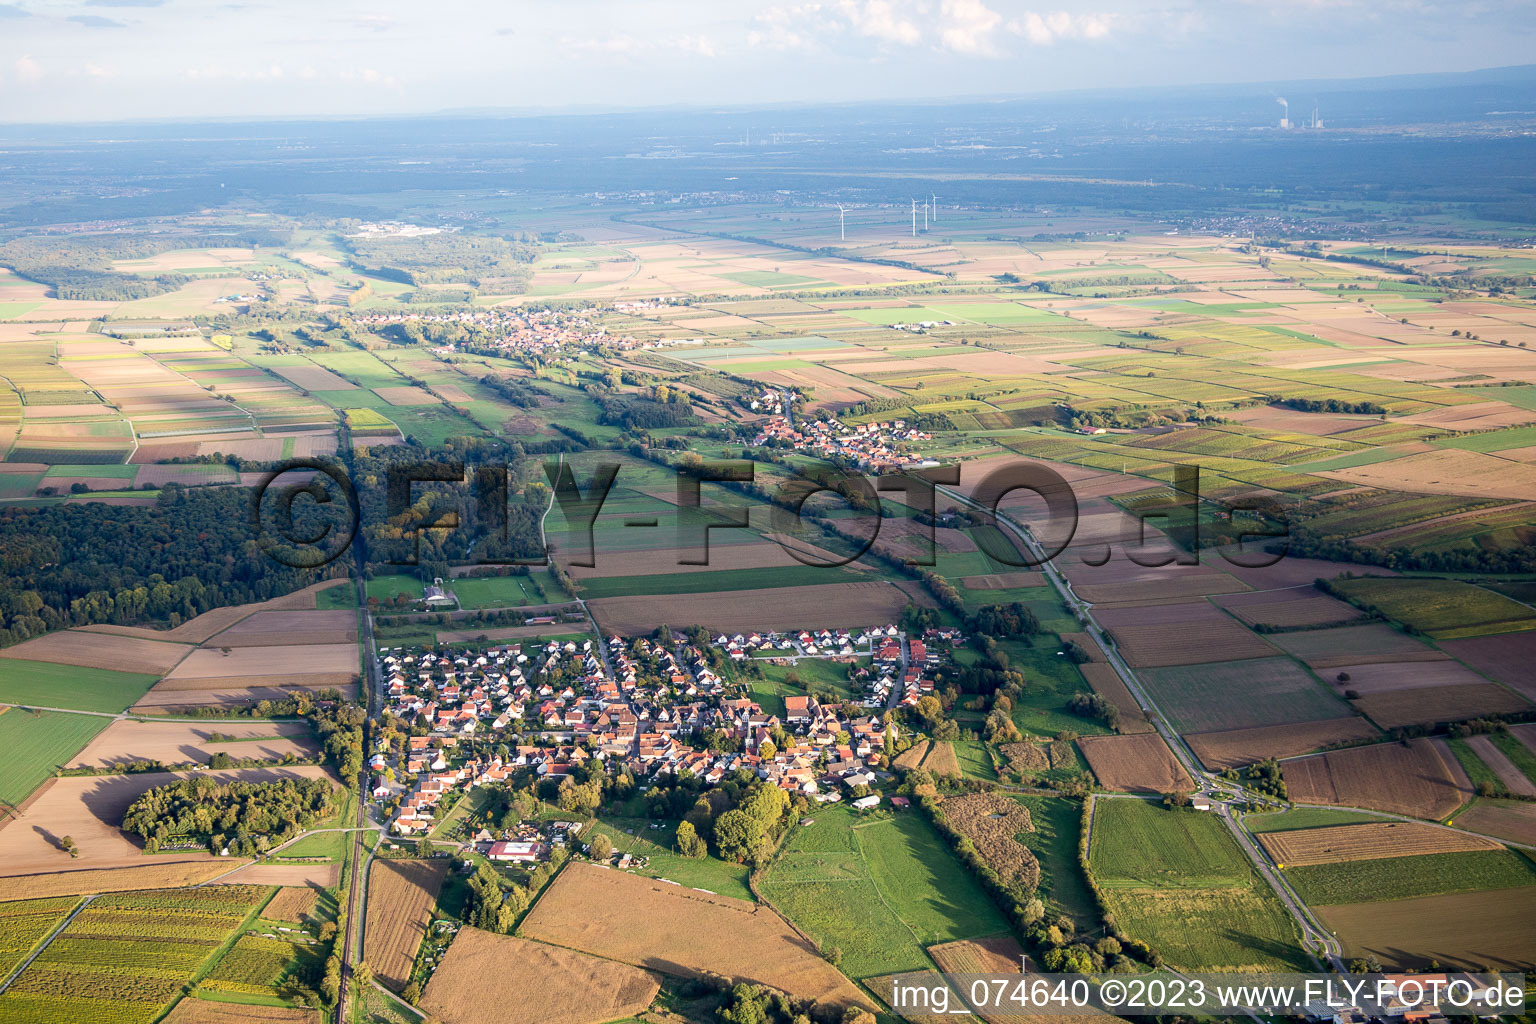 Barbelroth in the state Rhineland-Palatinate, Germany out of the air